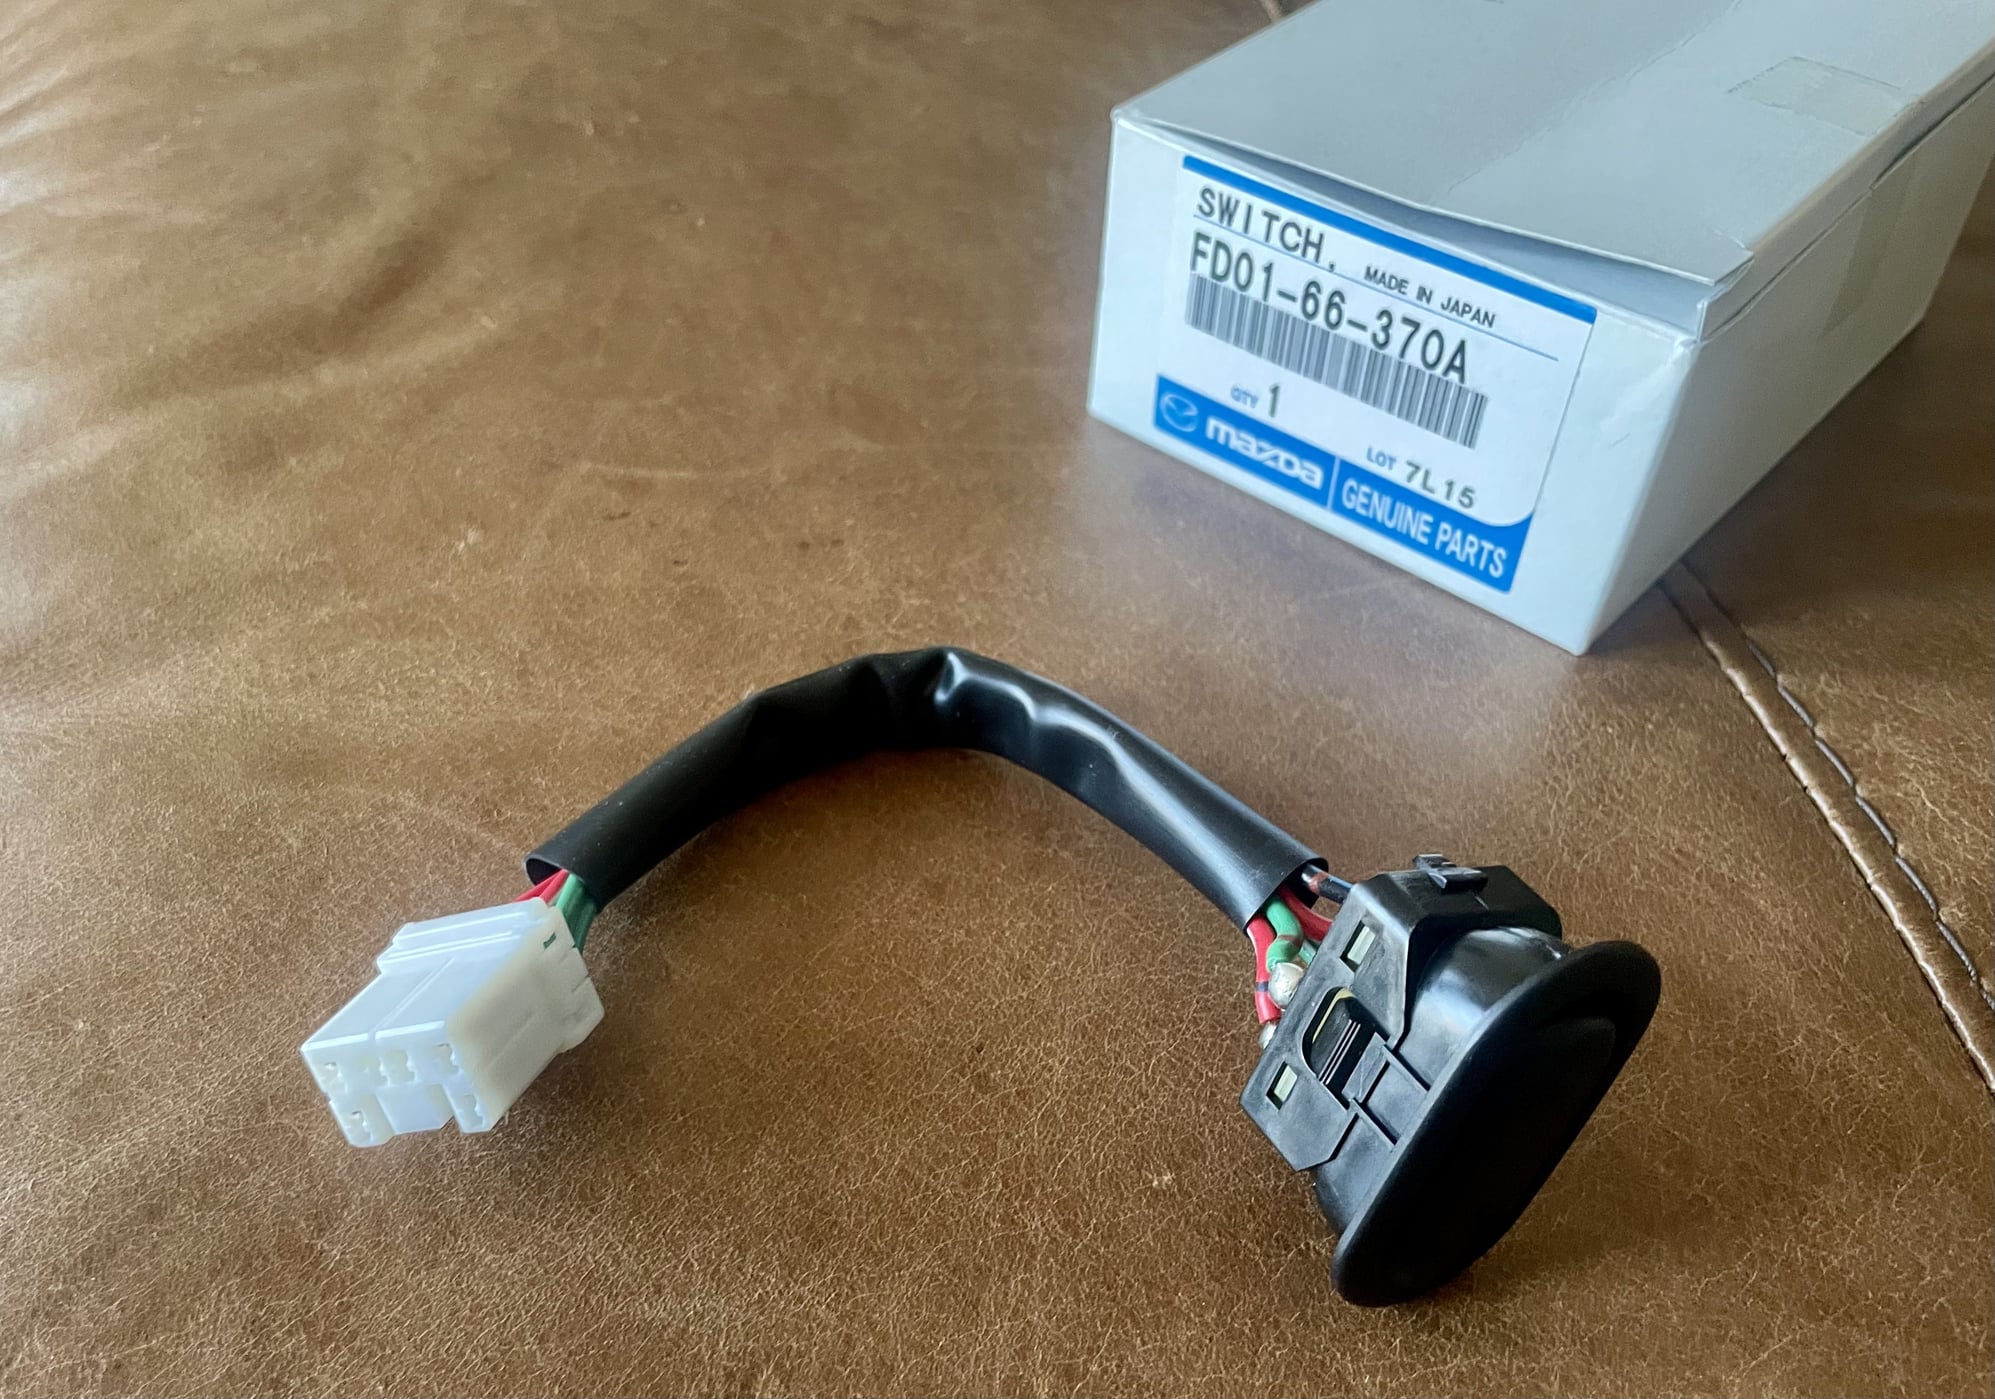 Interior/Upholstery - Right Power Window Switch OEM - p/n FD01-66-370A (2 Avail.) - New - 1993 to 1995 Mazda RX-7 - Falls Church, VA 22042, United States